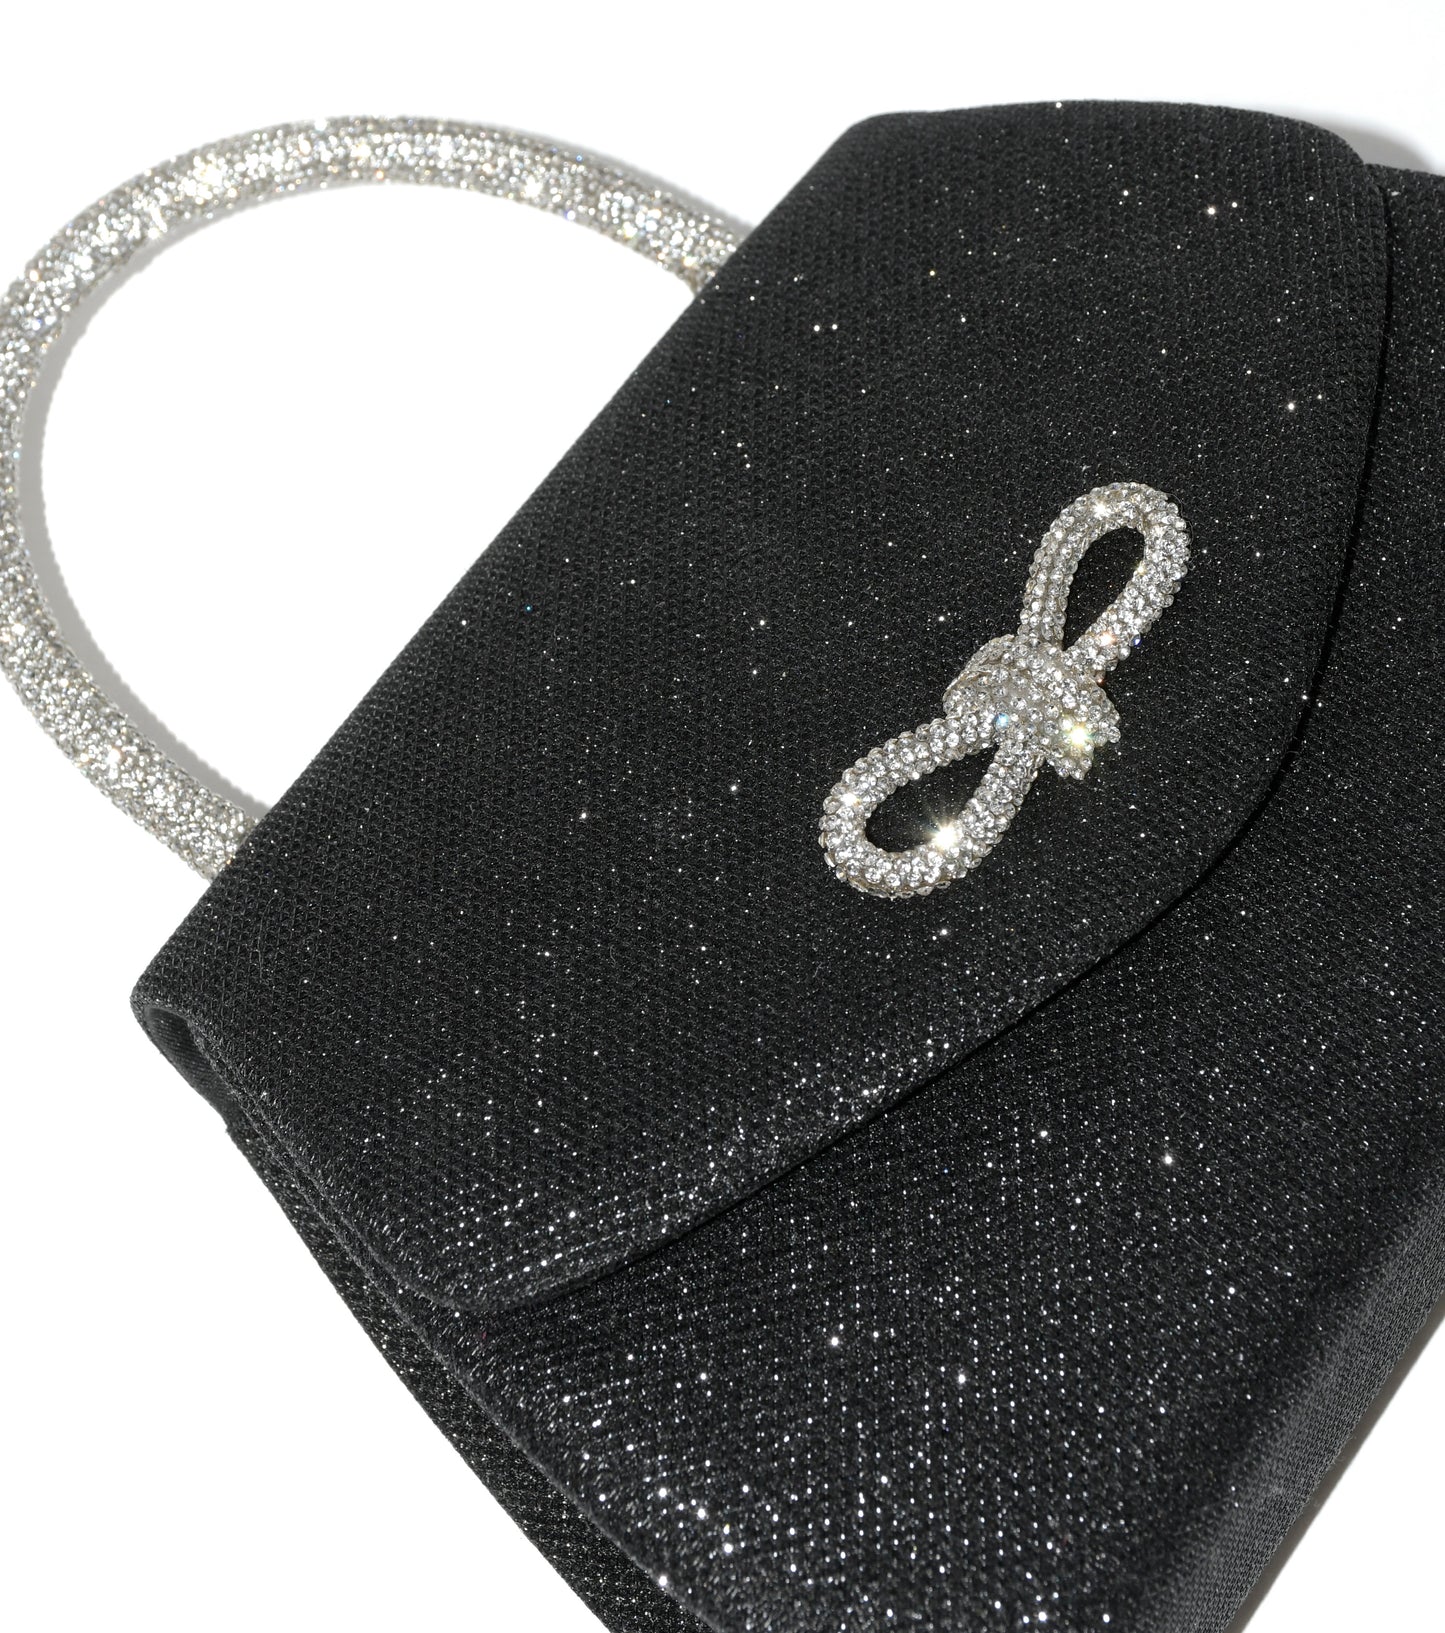 Evening Bag with Glitter Handle and Bow